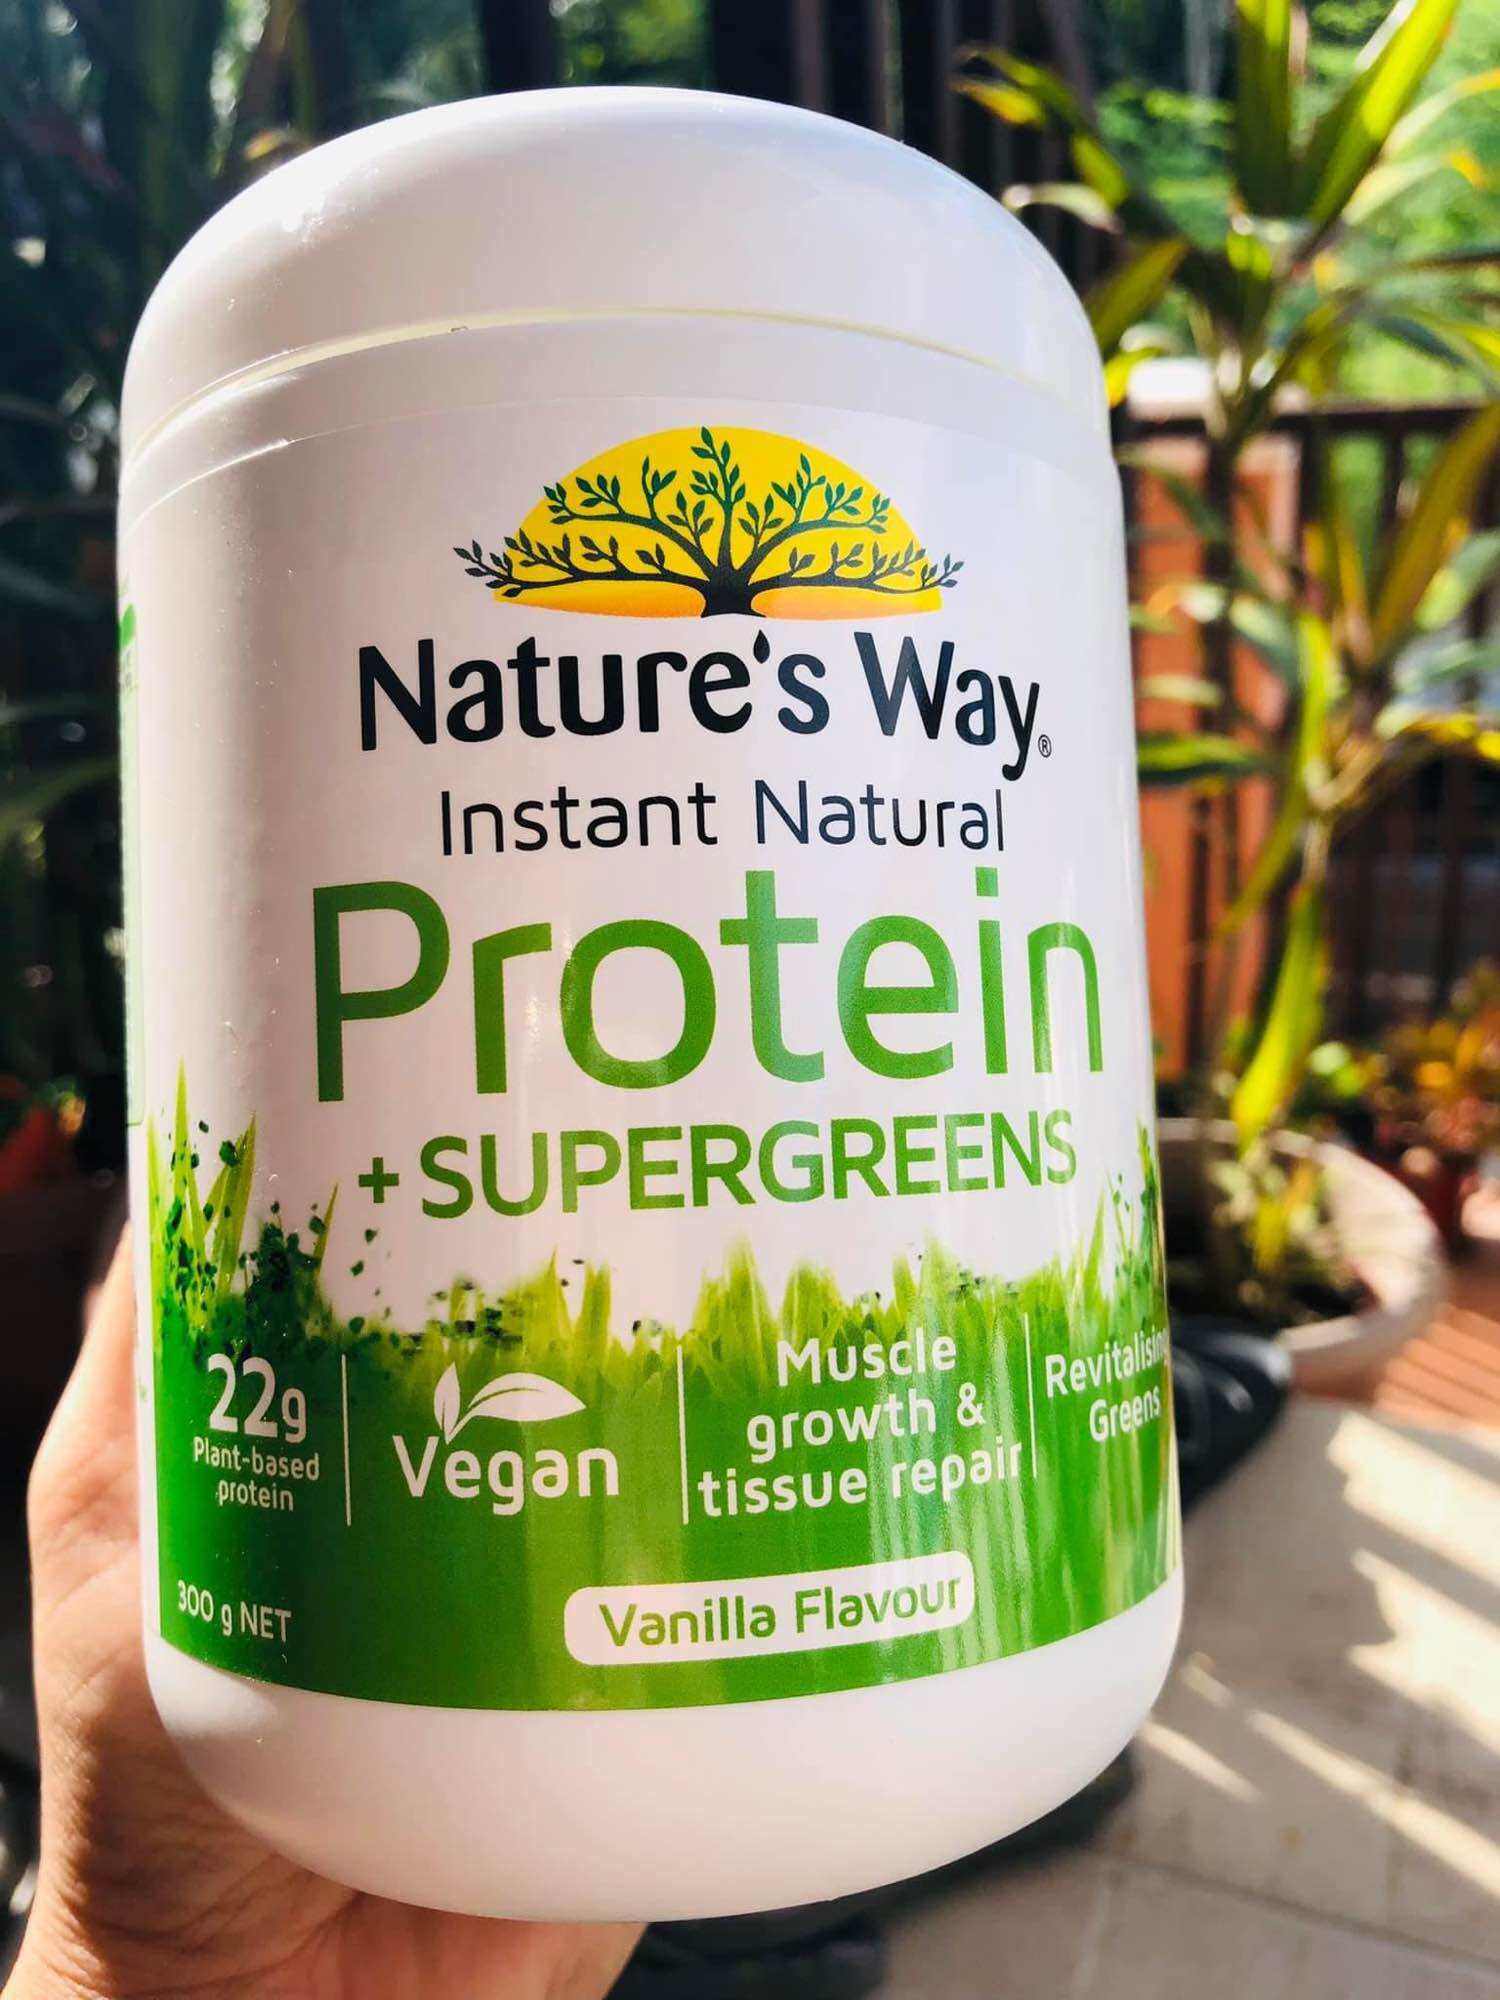 Nature's Way Instant Natural Protein with Super Greens Powder 300g - Bột Rau củ